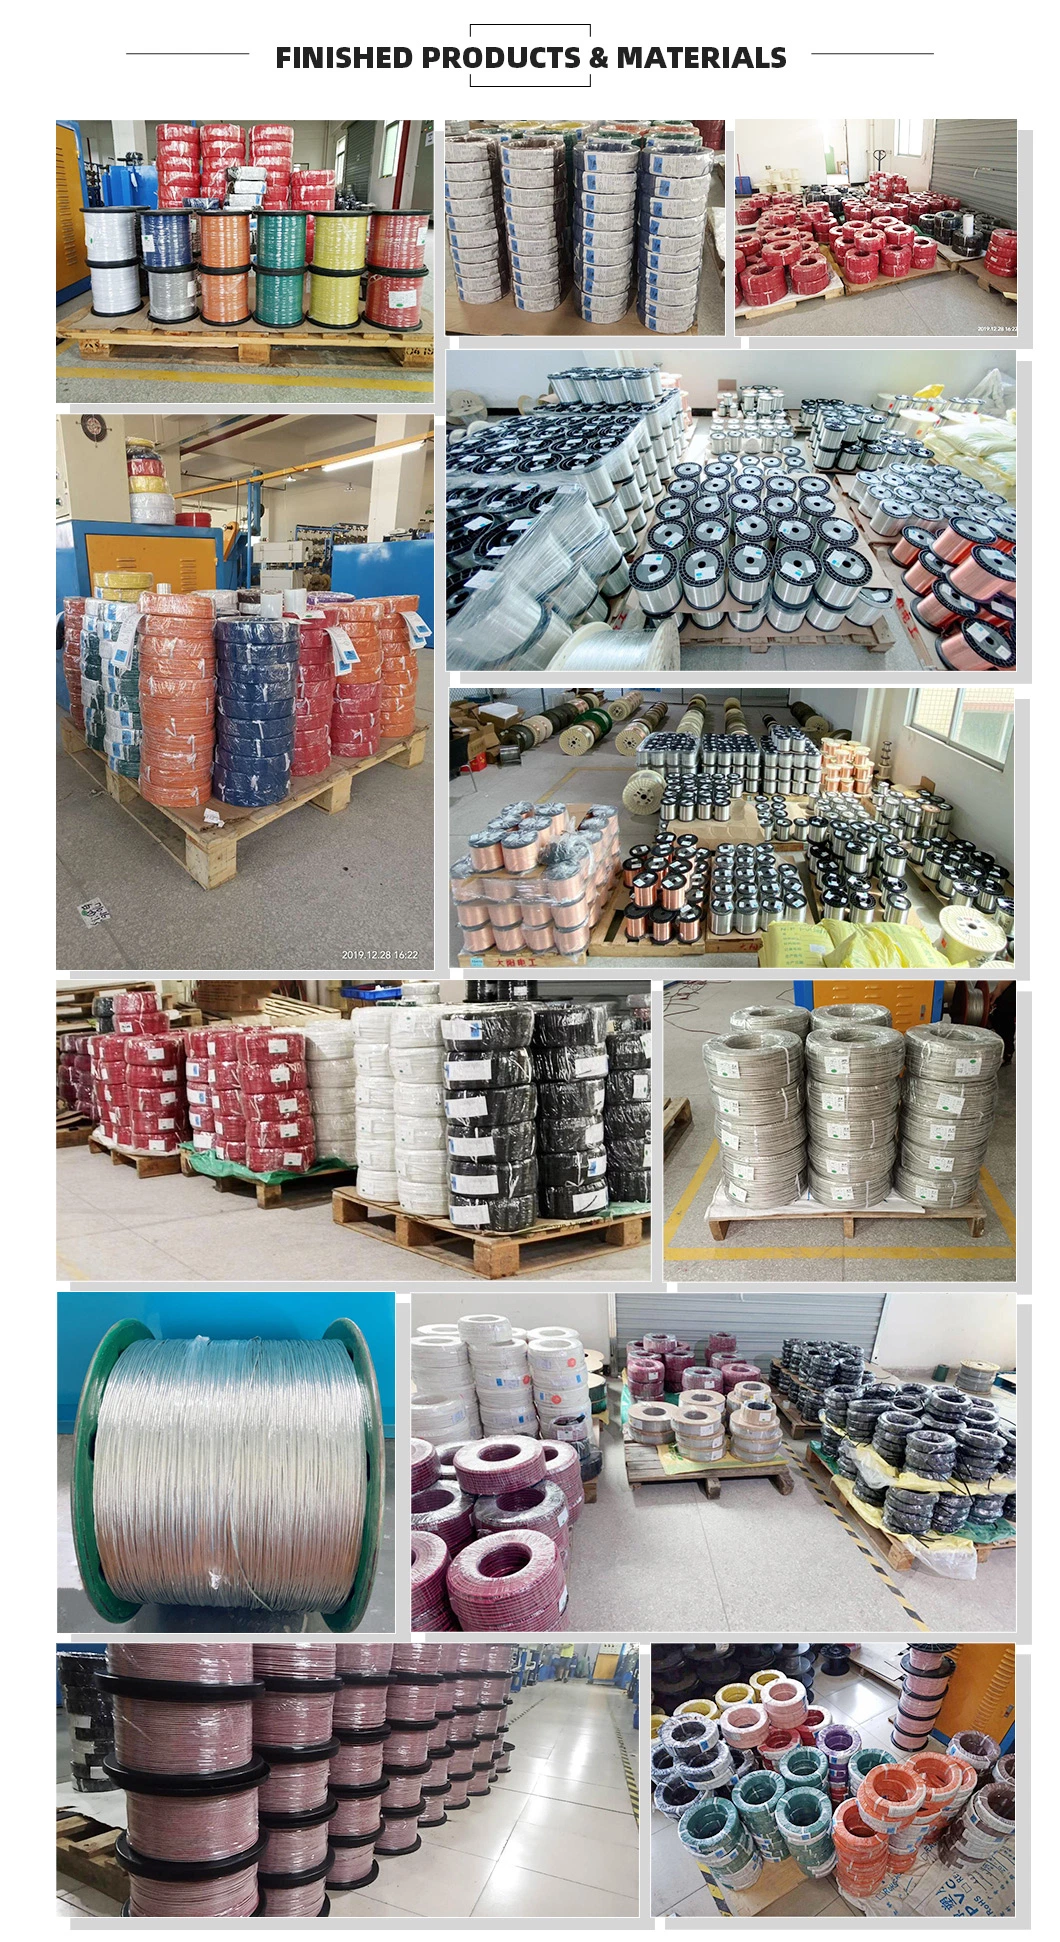 Round Wire Stranded Copper Electric Electrical PVC Flexible Shielded Power Cable UL2587